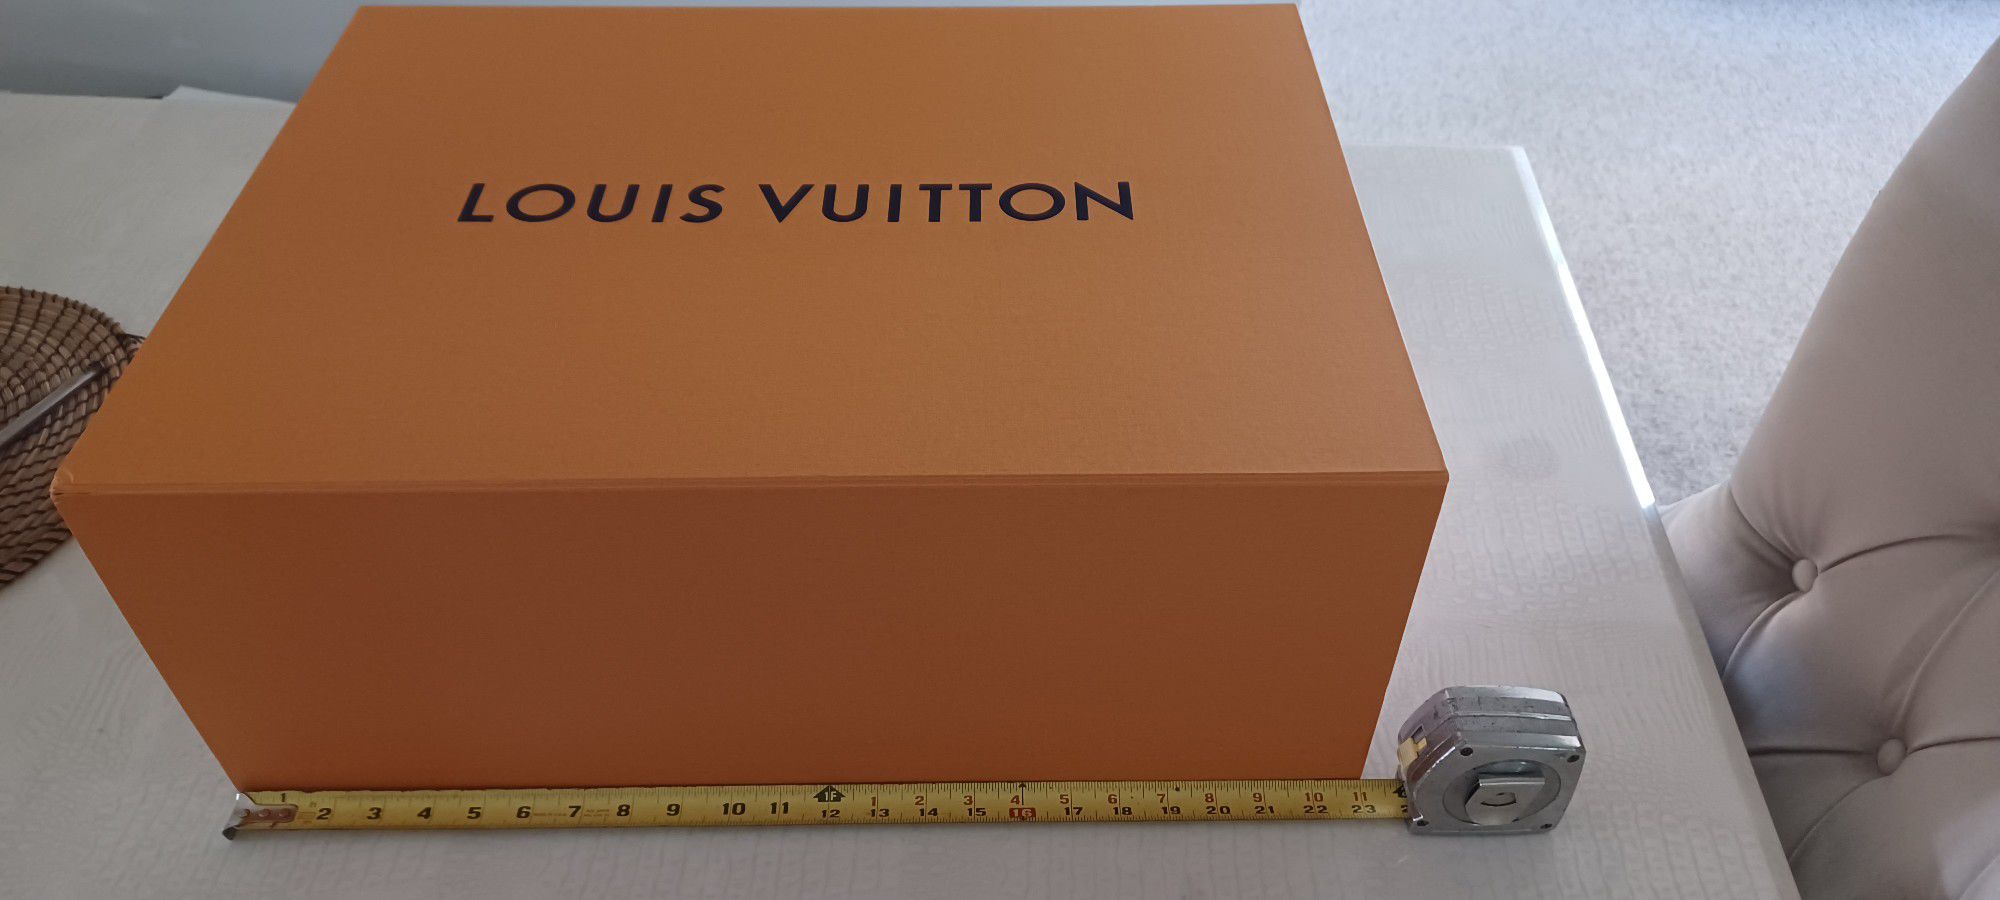 Louis Vuitton XL Magnetic storage box for Sale in Laud Lakes, FL - OfferUp